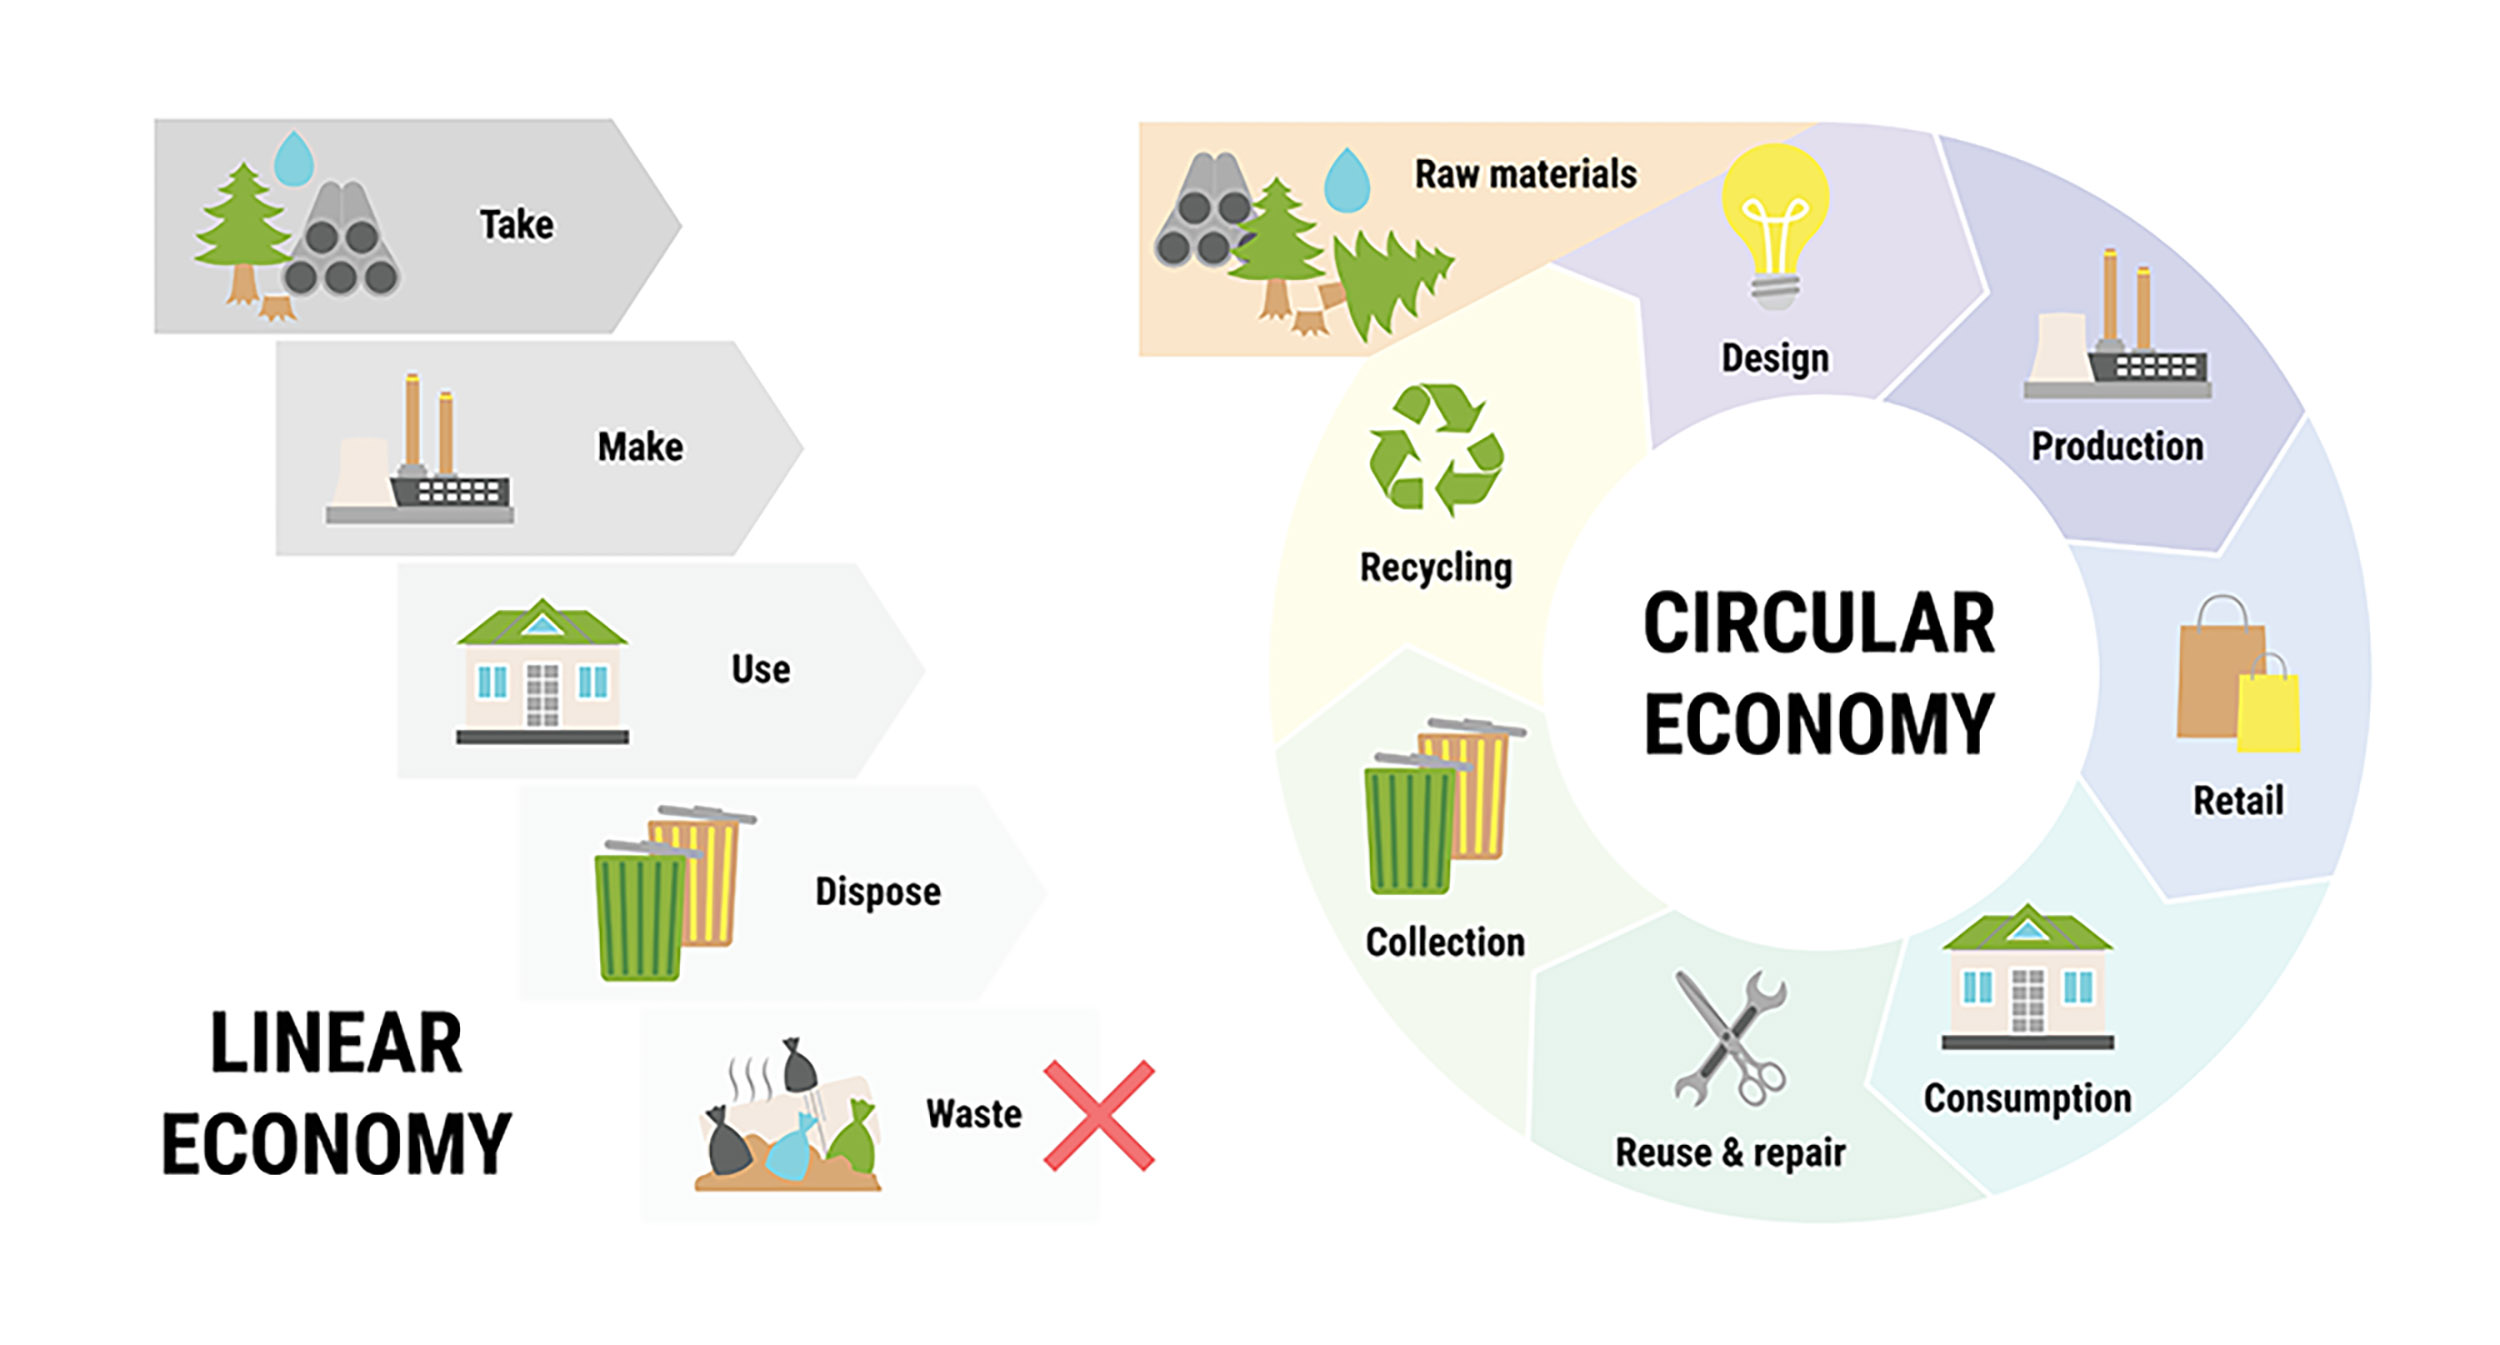 Flow chart illustration compares a linear economy leading to waste versus a circular economy where materials are recycled and reused.